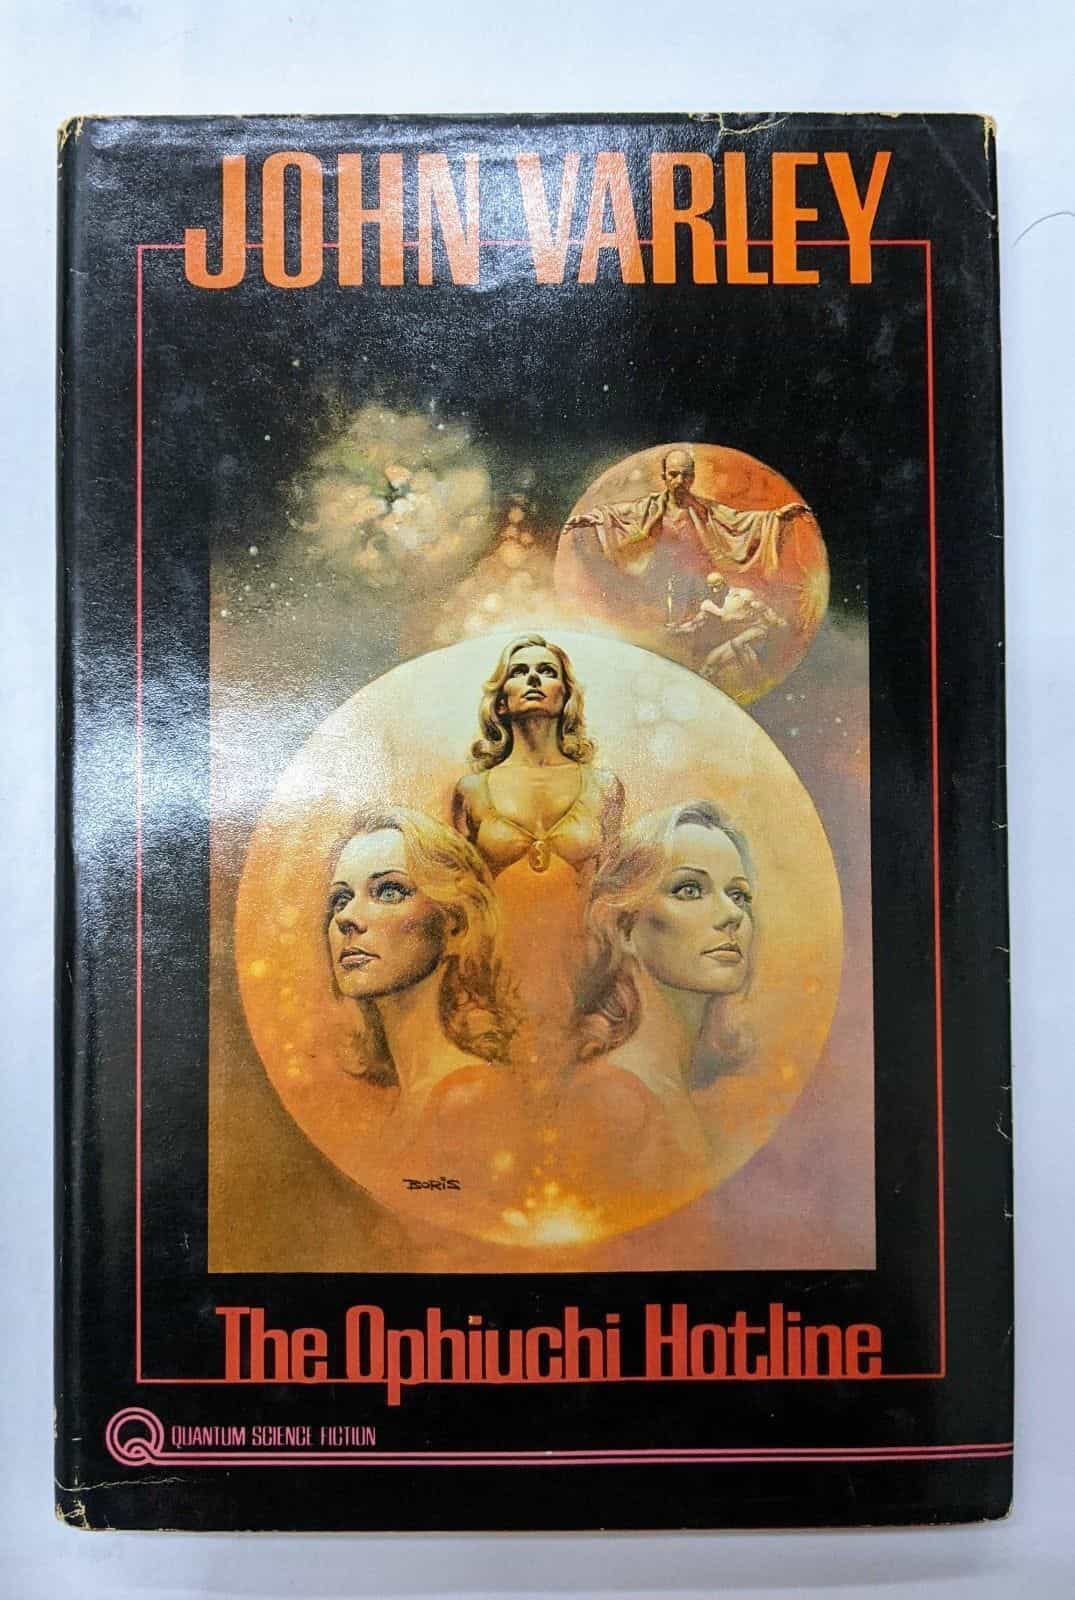 The Ophiuchi Hotline by John Varley Book